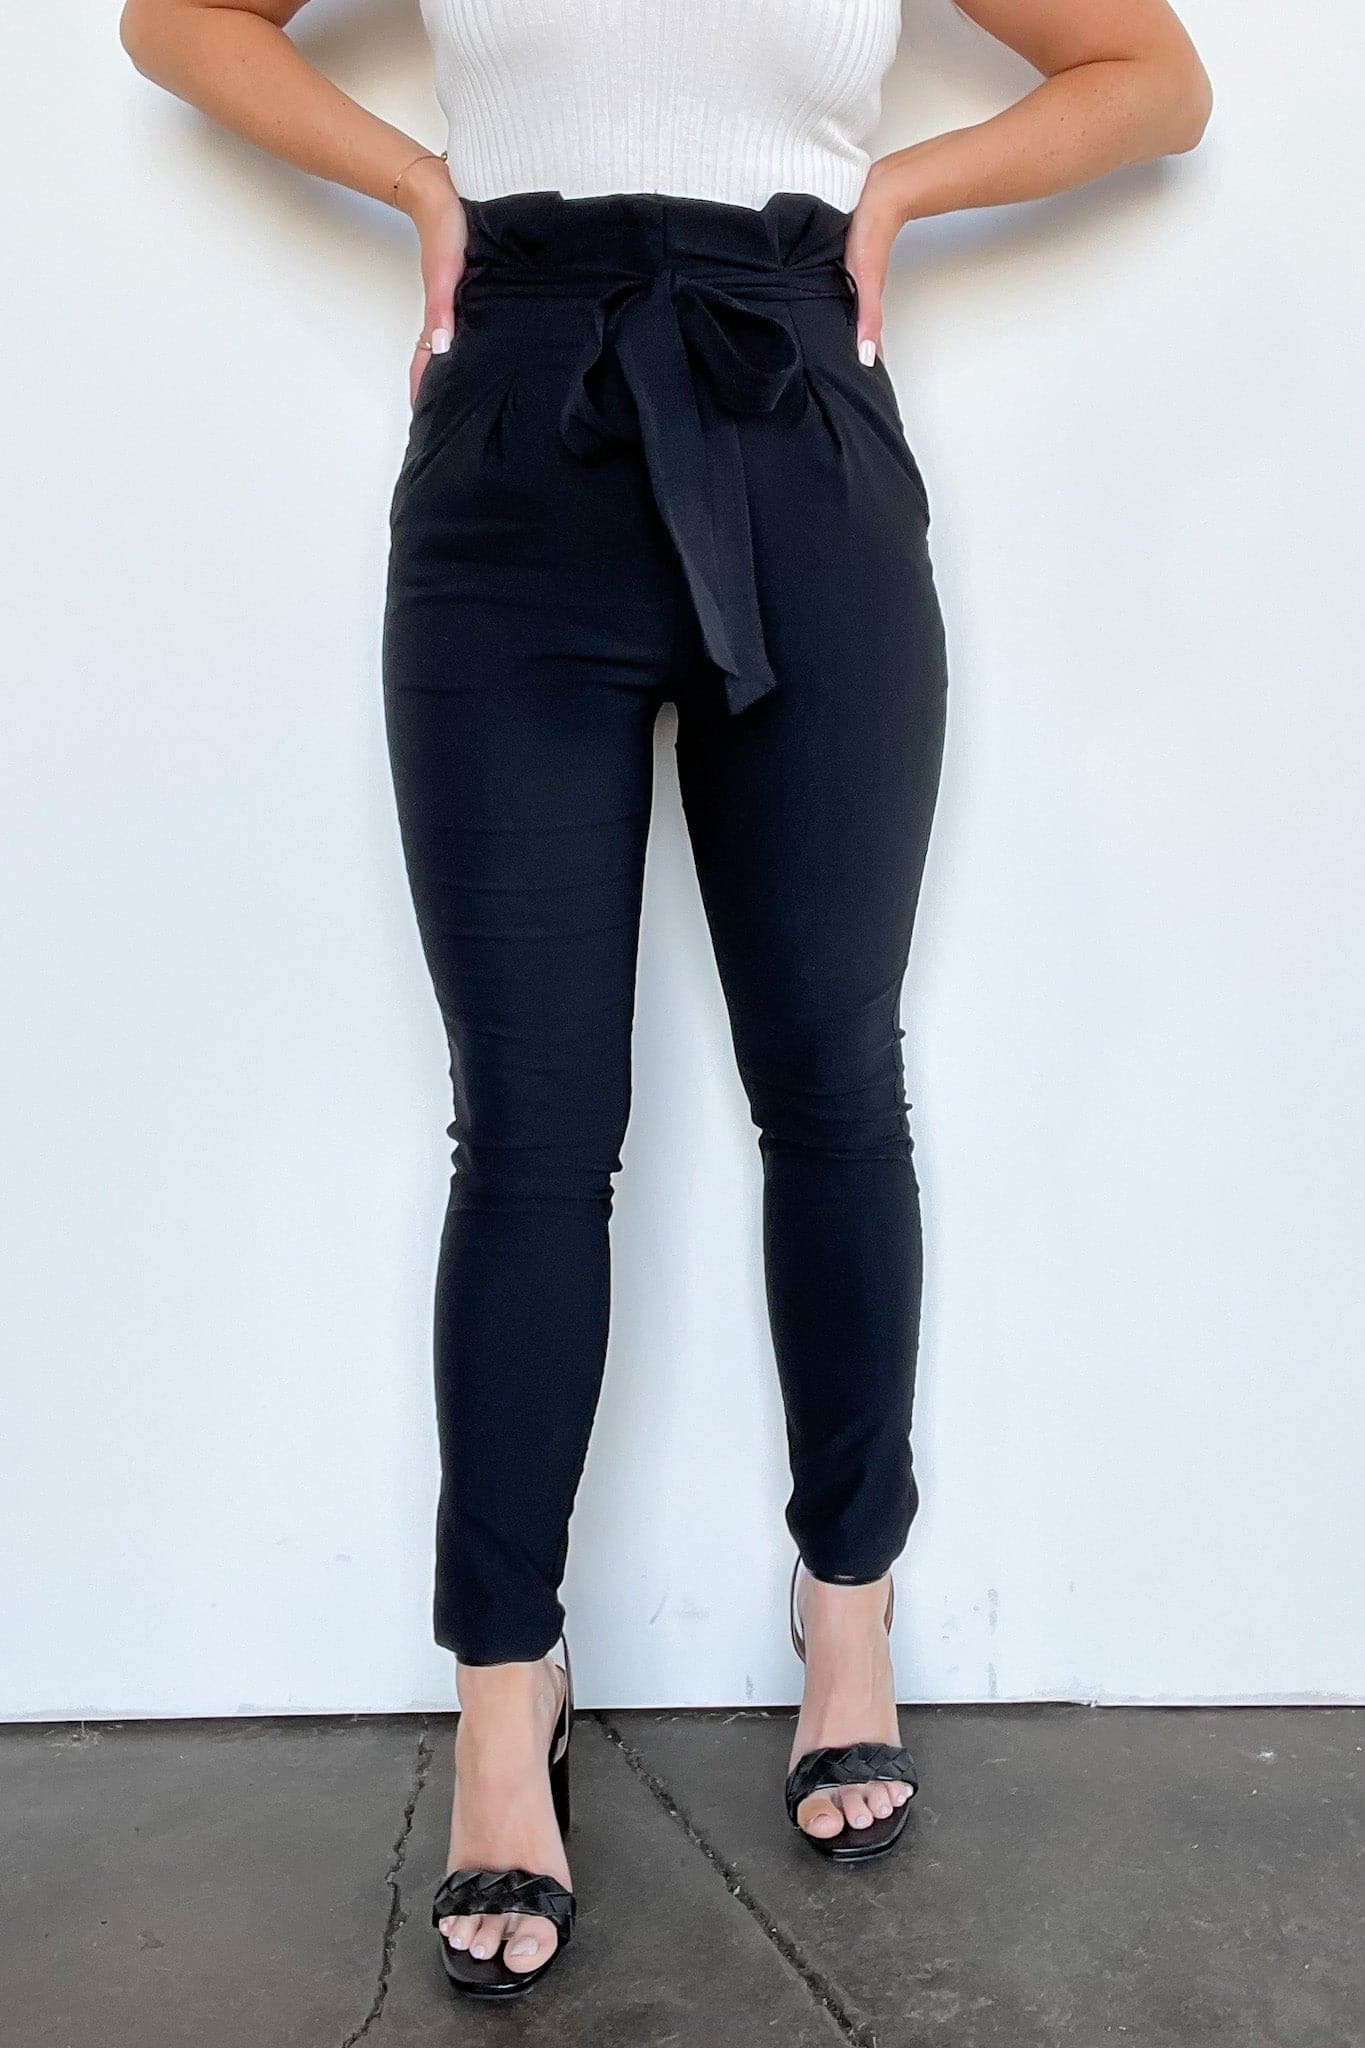  Riona Ruffled Waist Tie Skinny Pants - BACK IN STOCK - Madison and Mallory